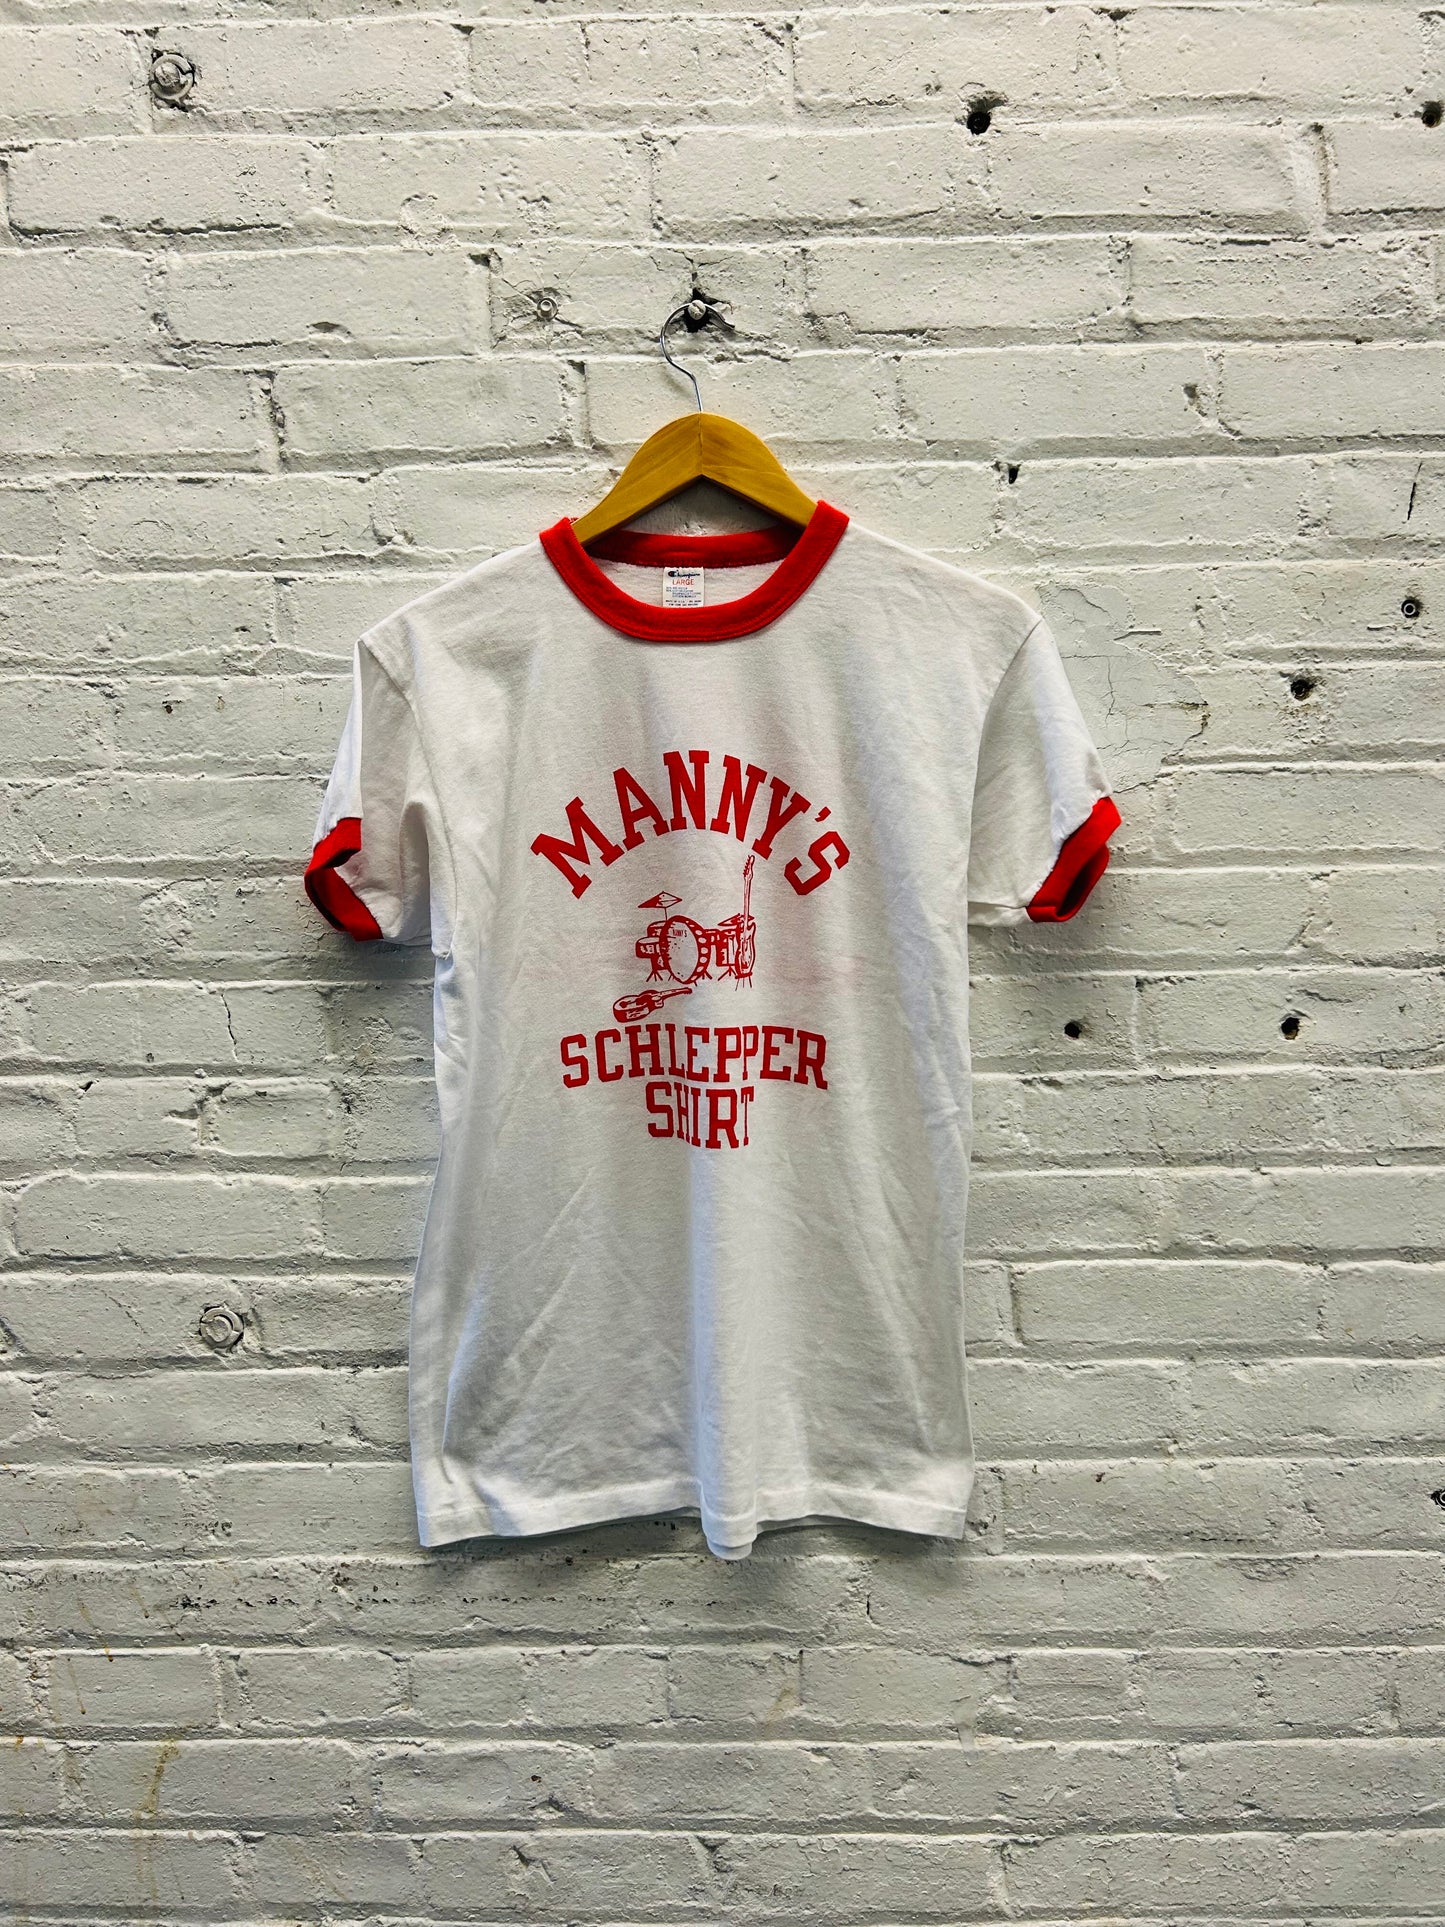 Manny's NYC Schlepper Shirt - Large